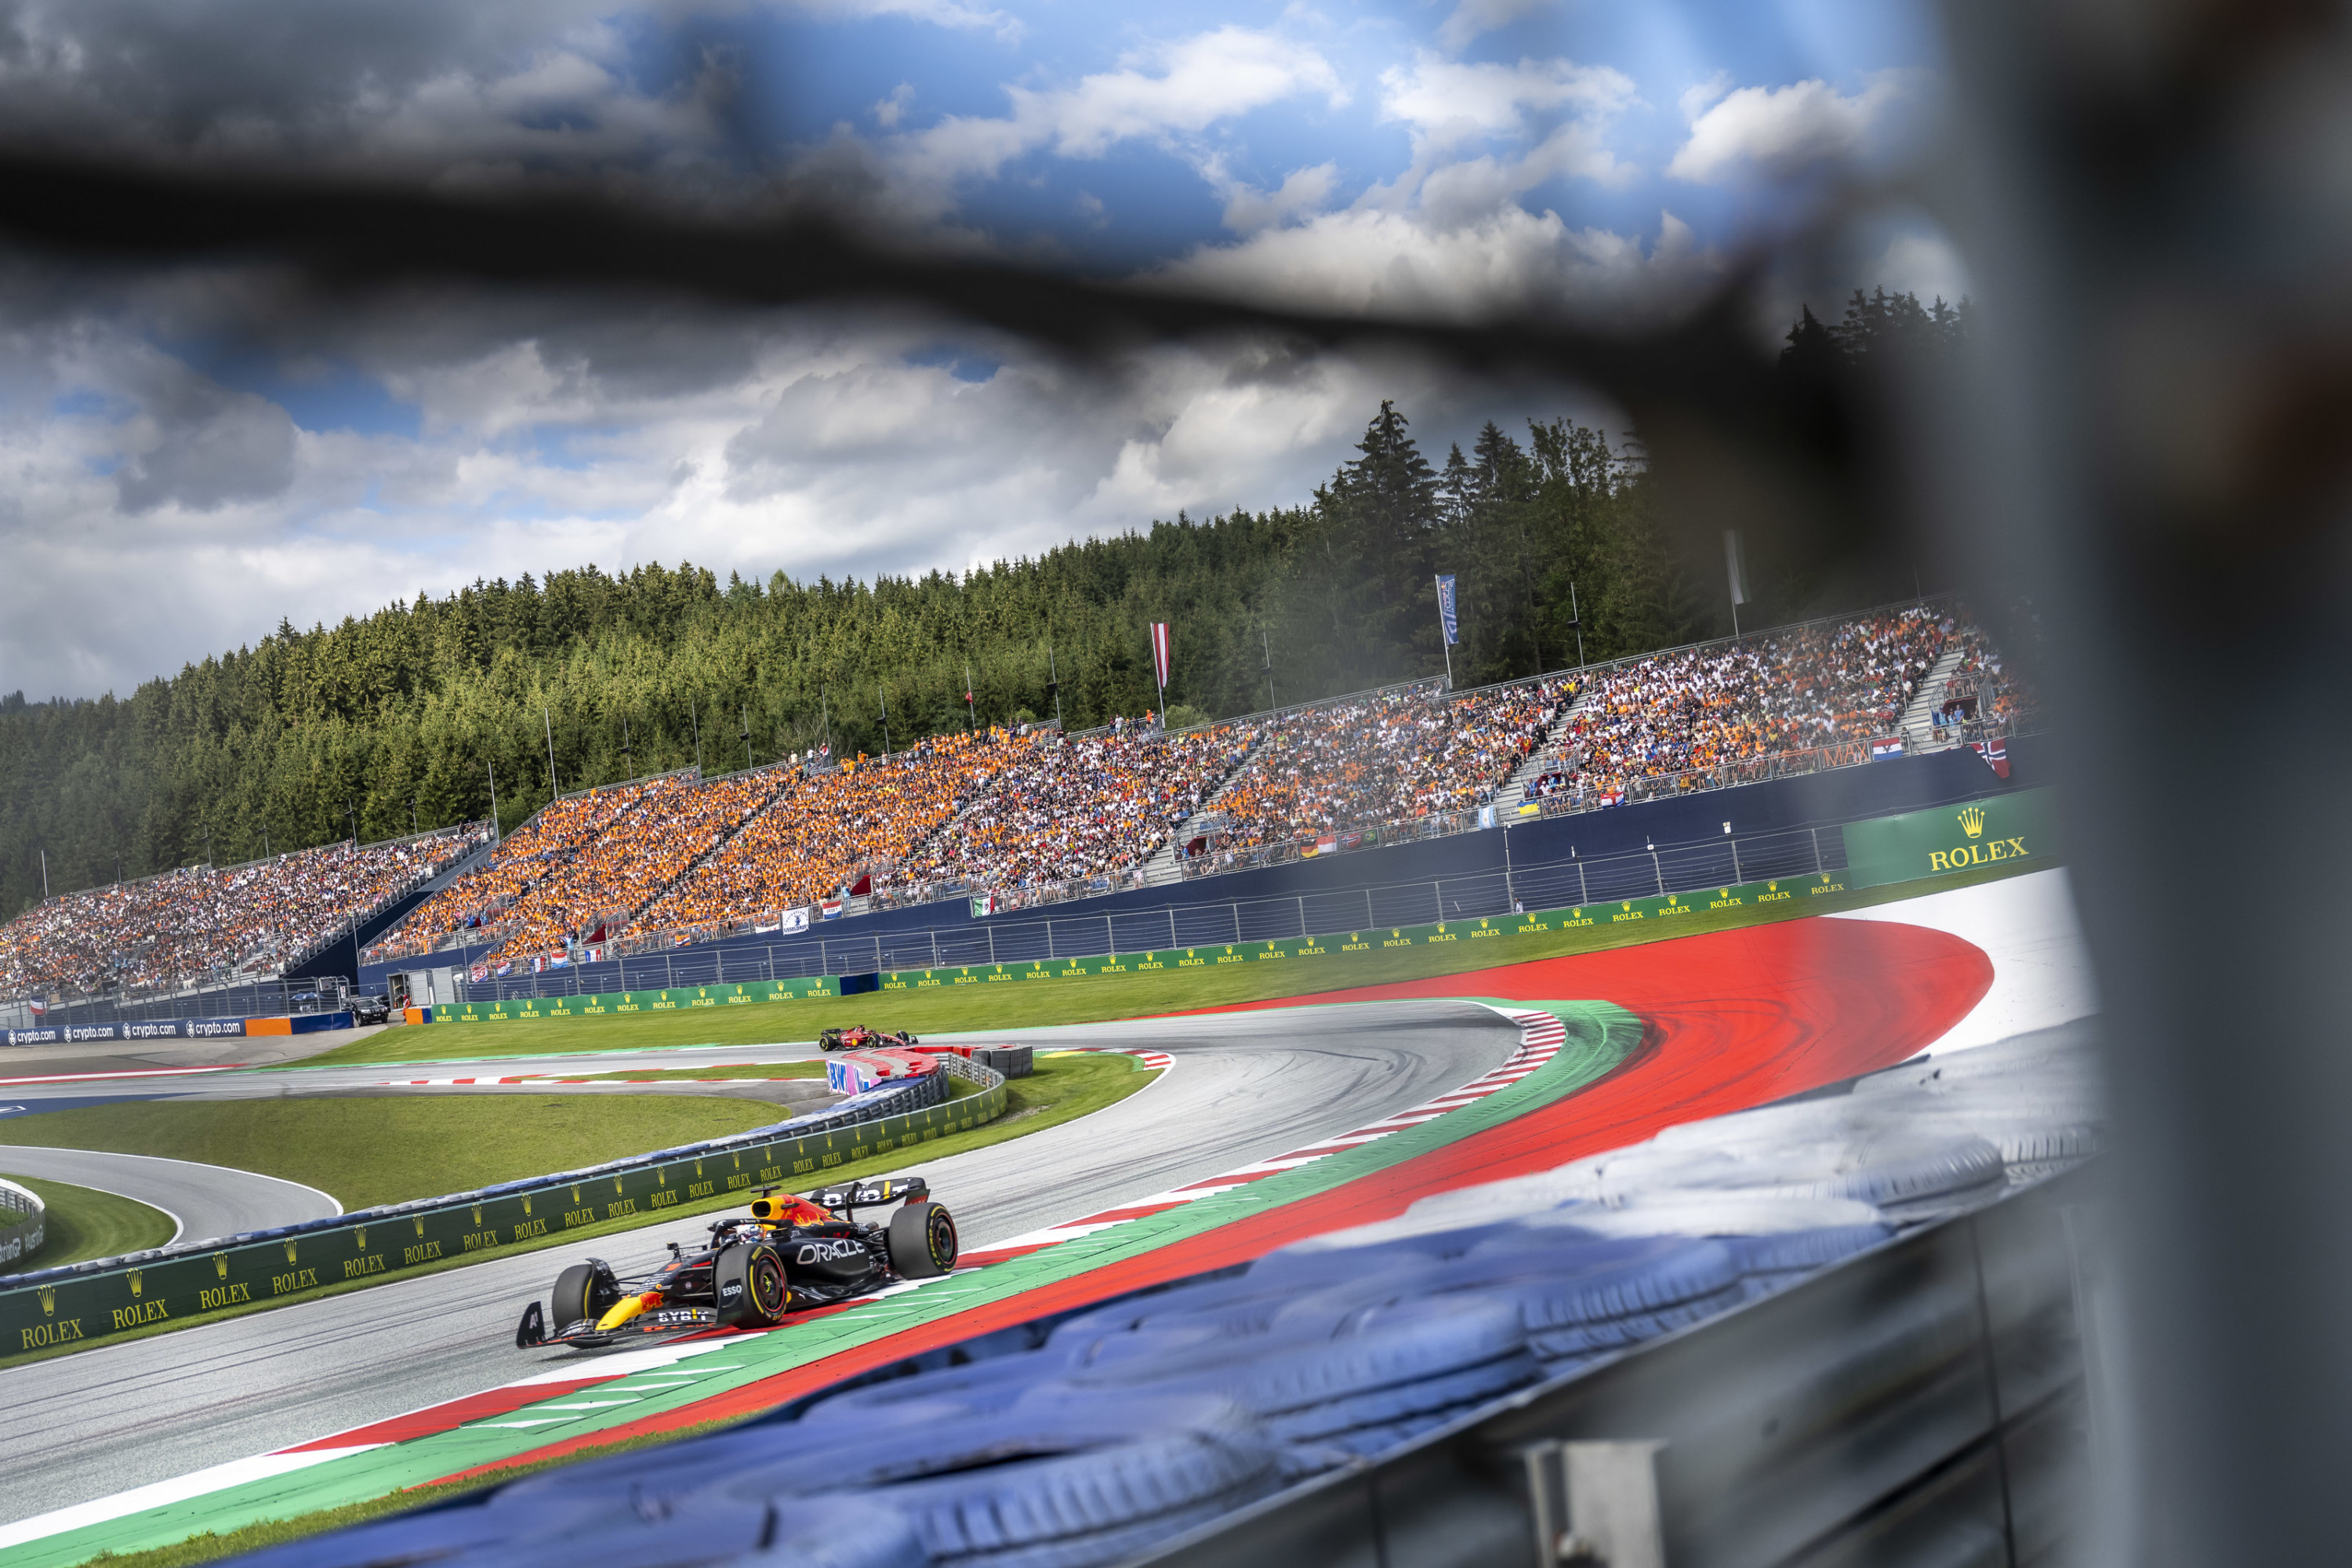 Contract extension: F1 to race at the Red Bull Ring until 2027